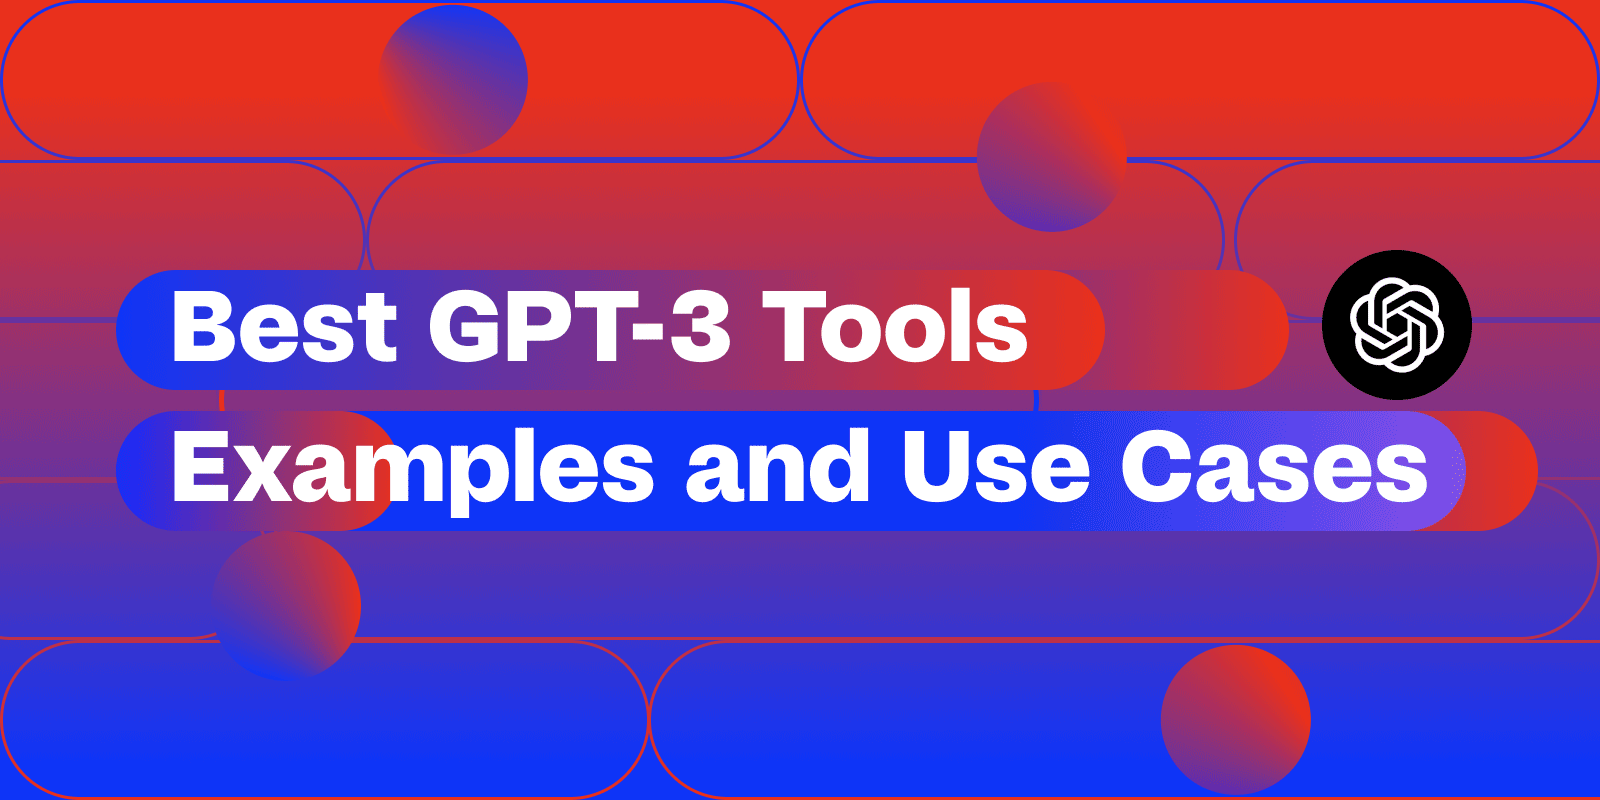 Best GPT 3 Tools Examples and Use Cases